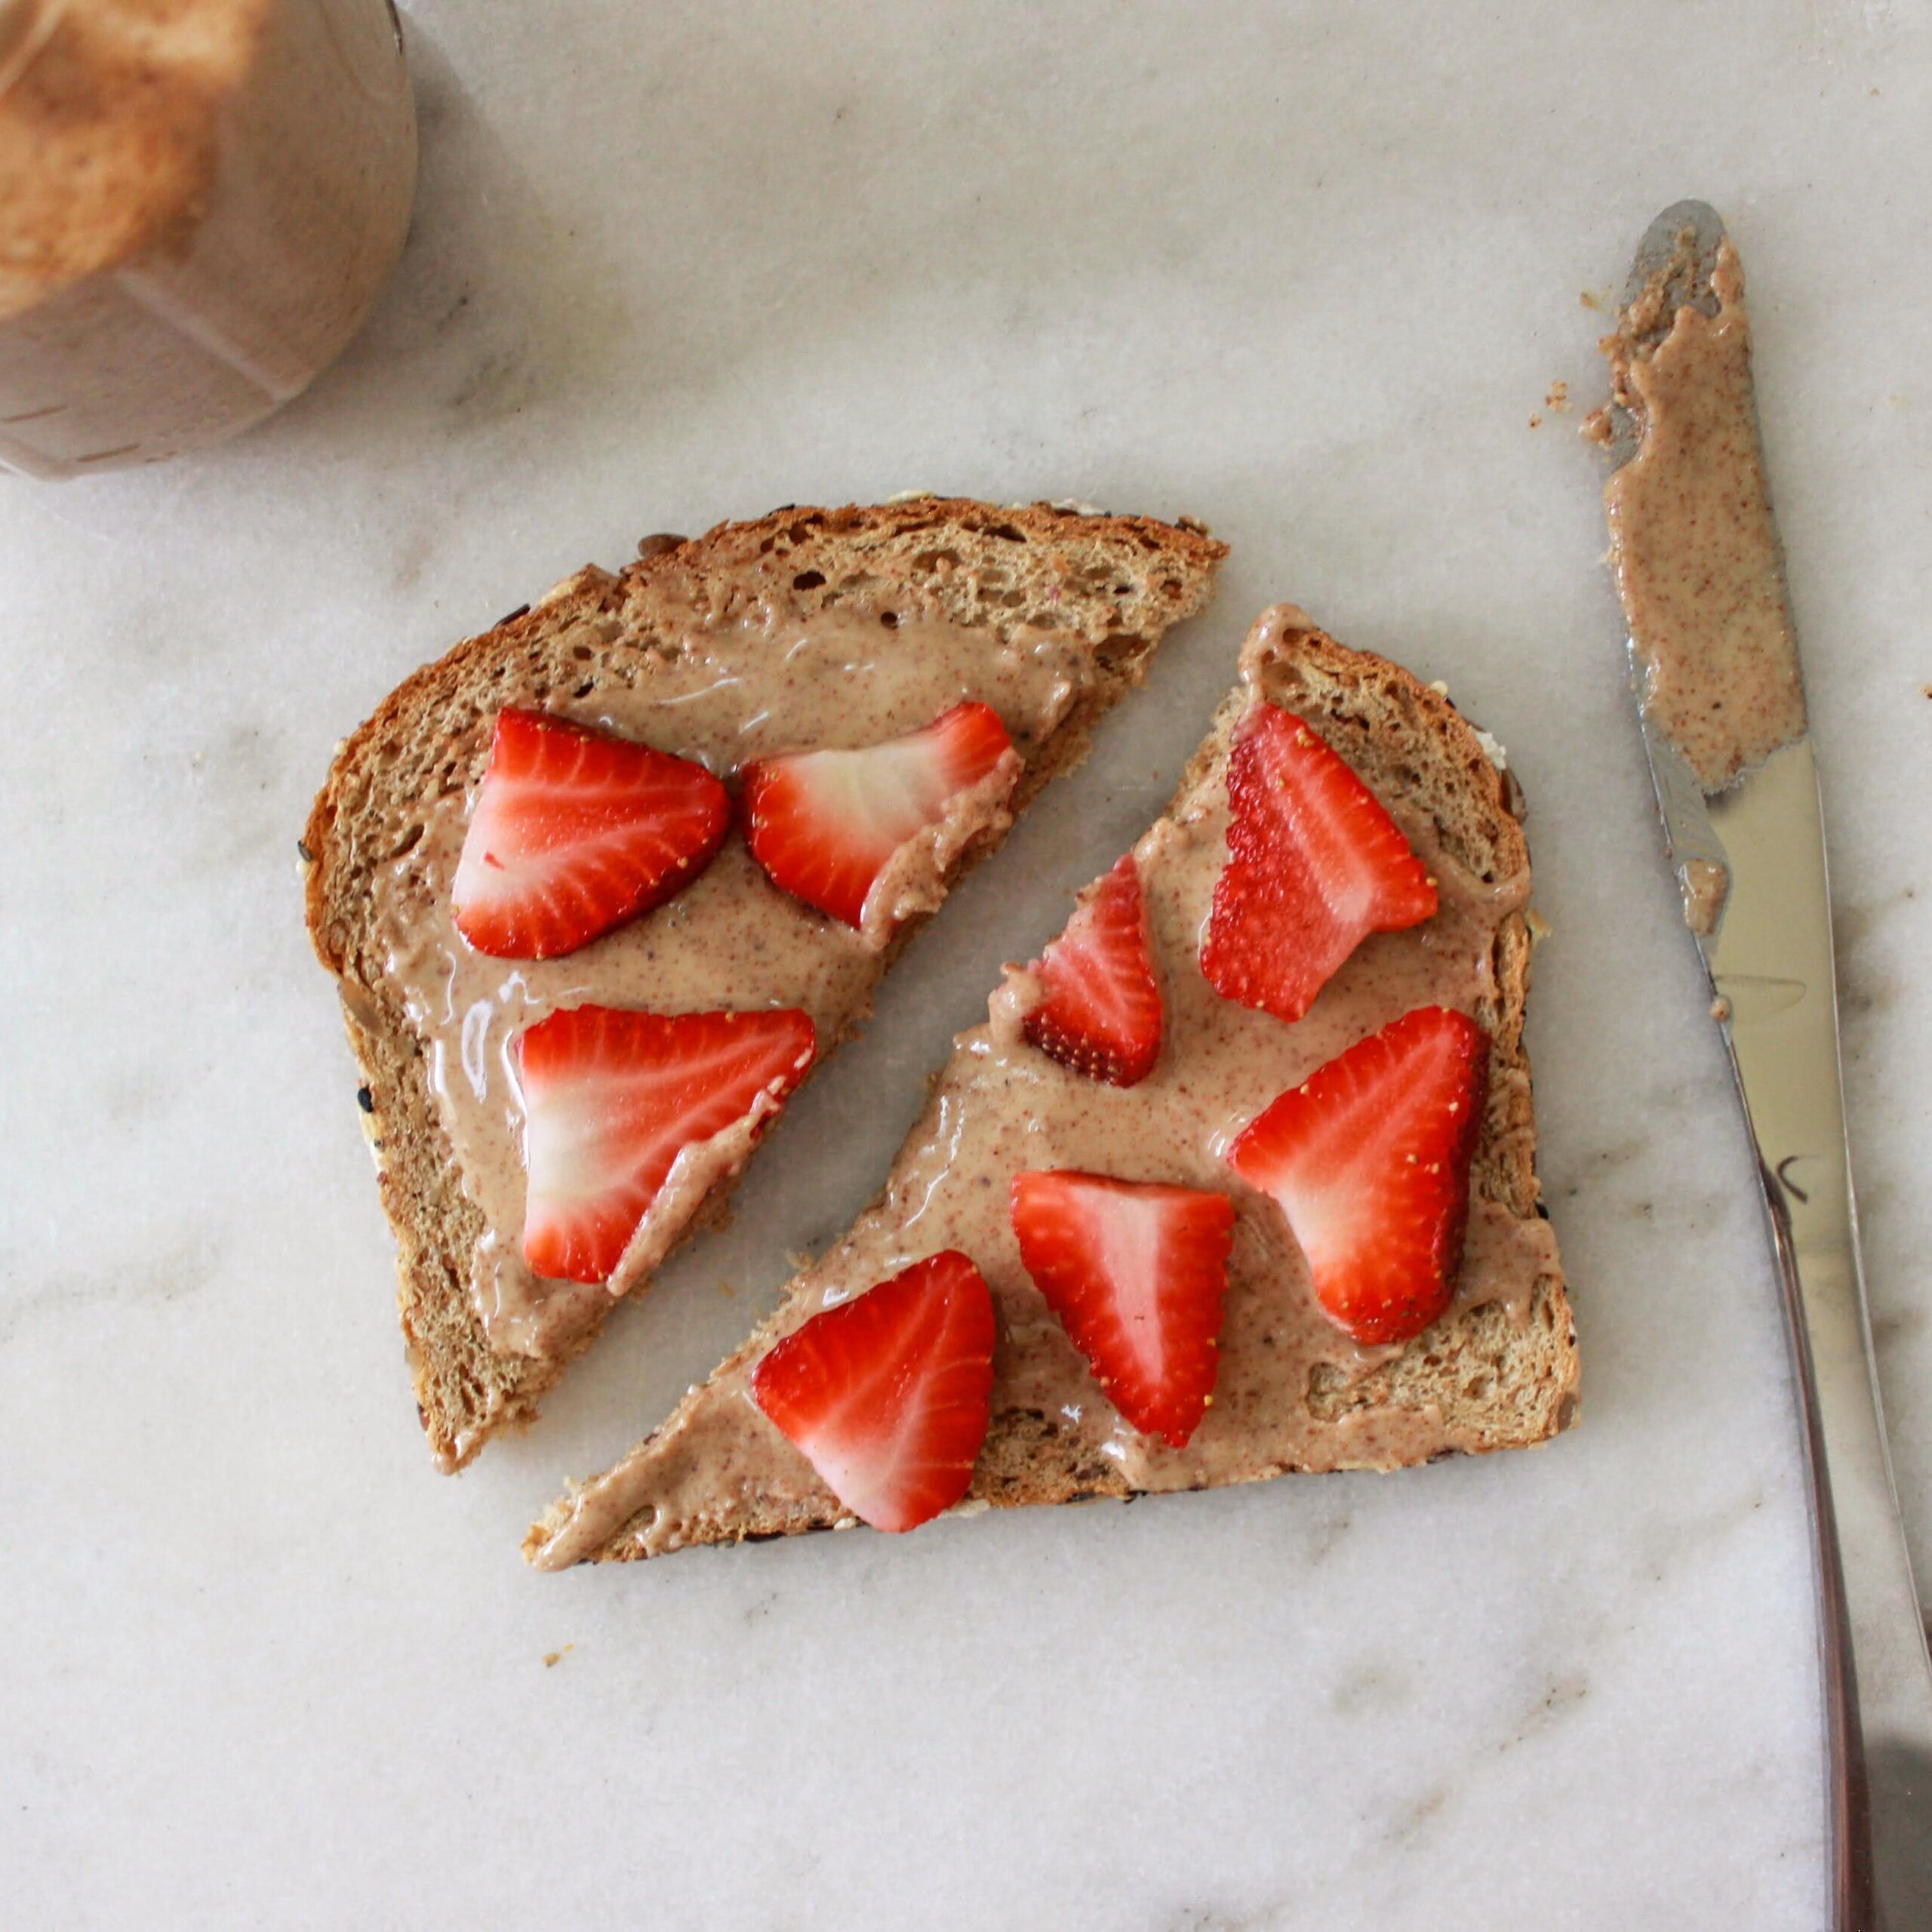 Almond butter on toast with strawberries